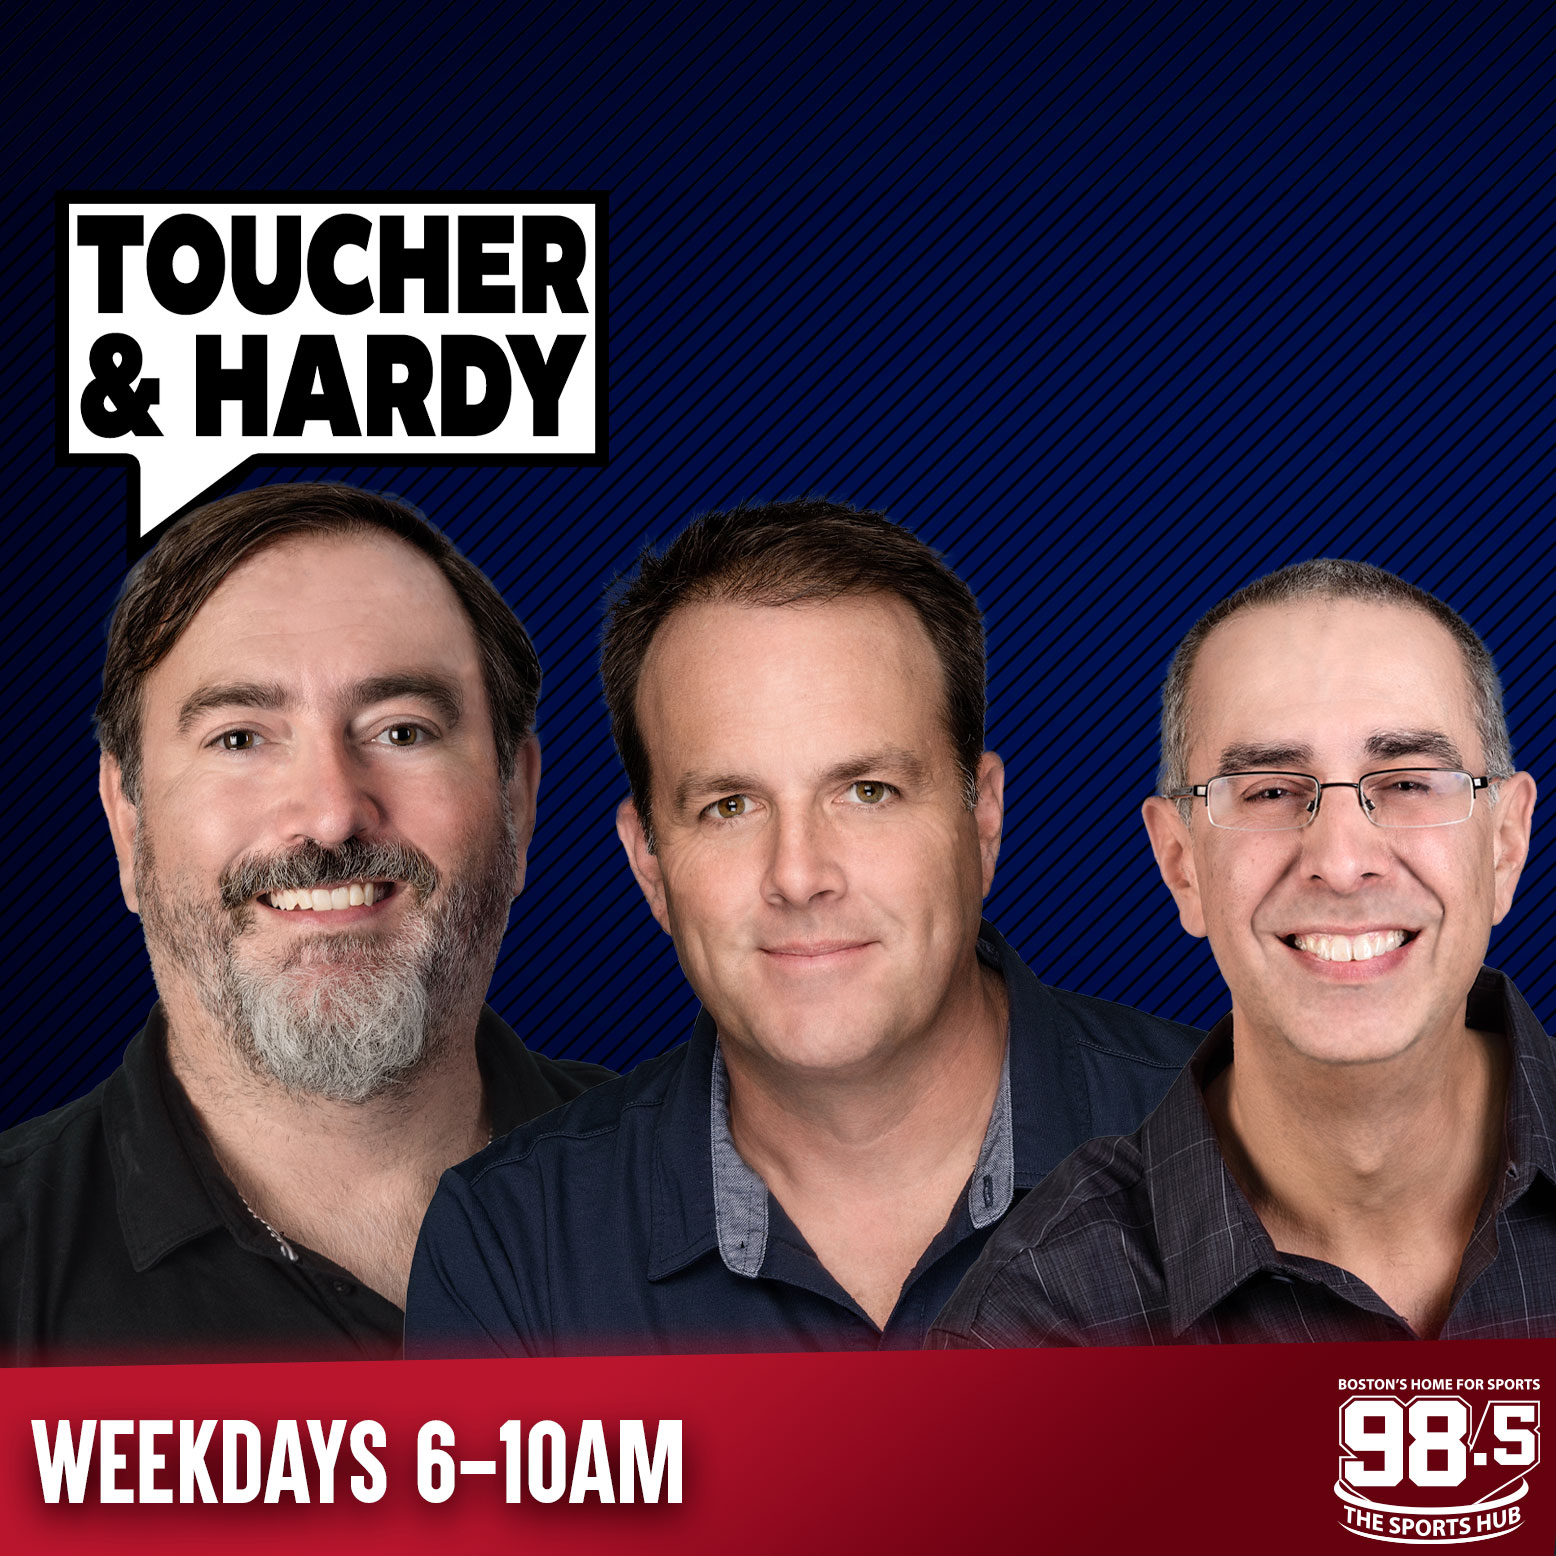 Hardy’s “Drive for 5” experience | Michael Hurley joins Toucher & Hardy - 2/9 (Hour 2)